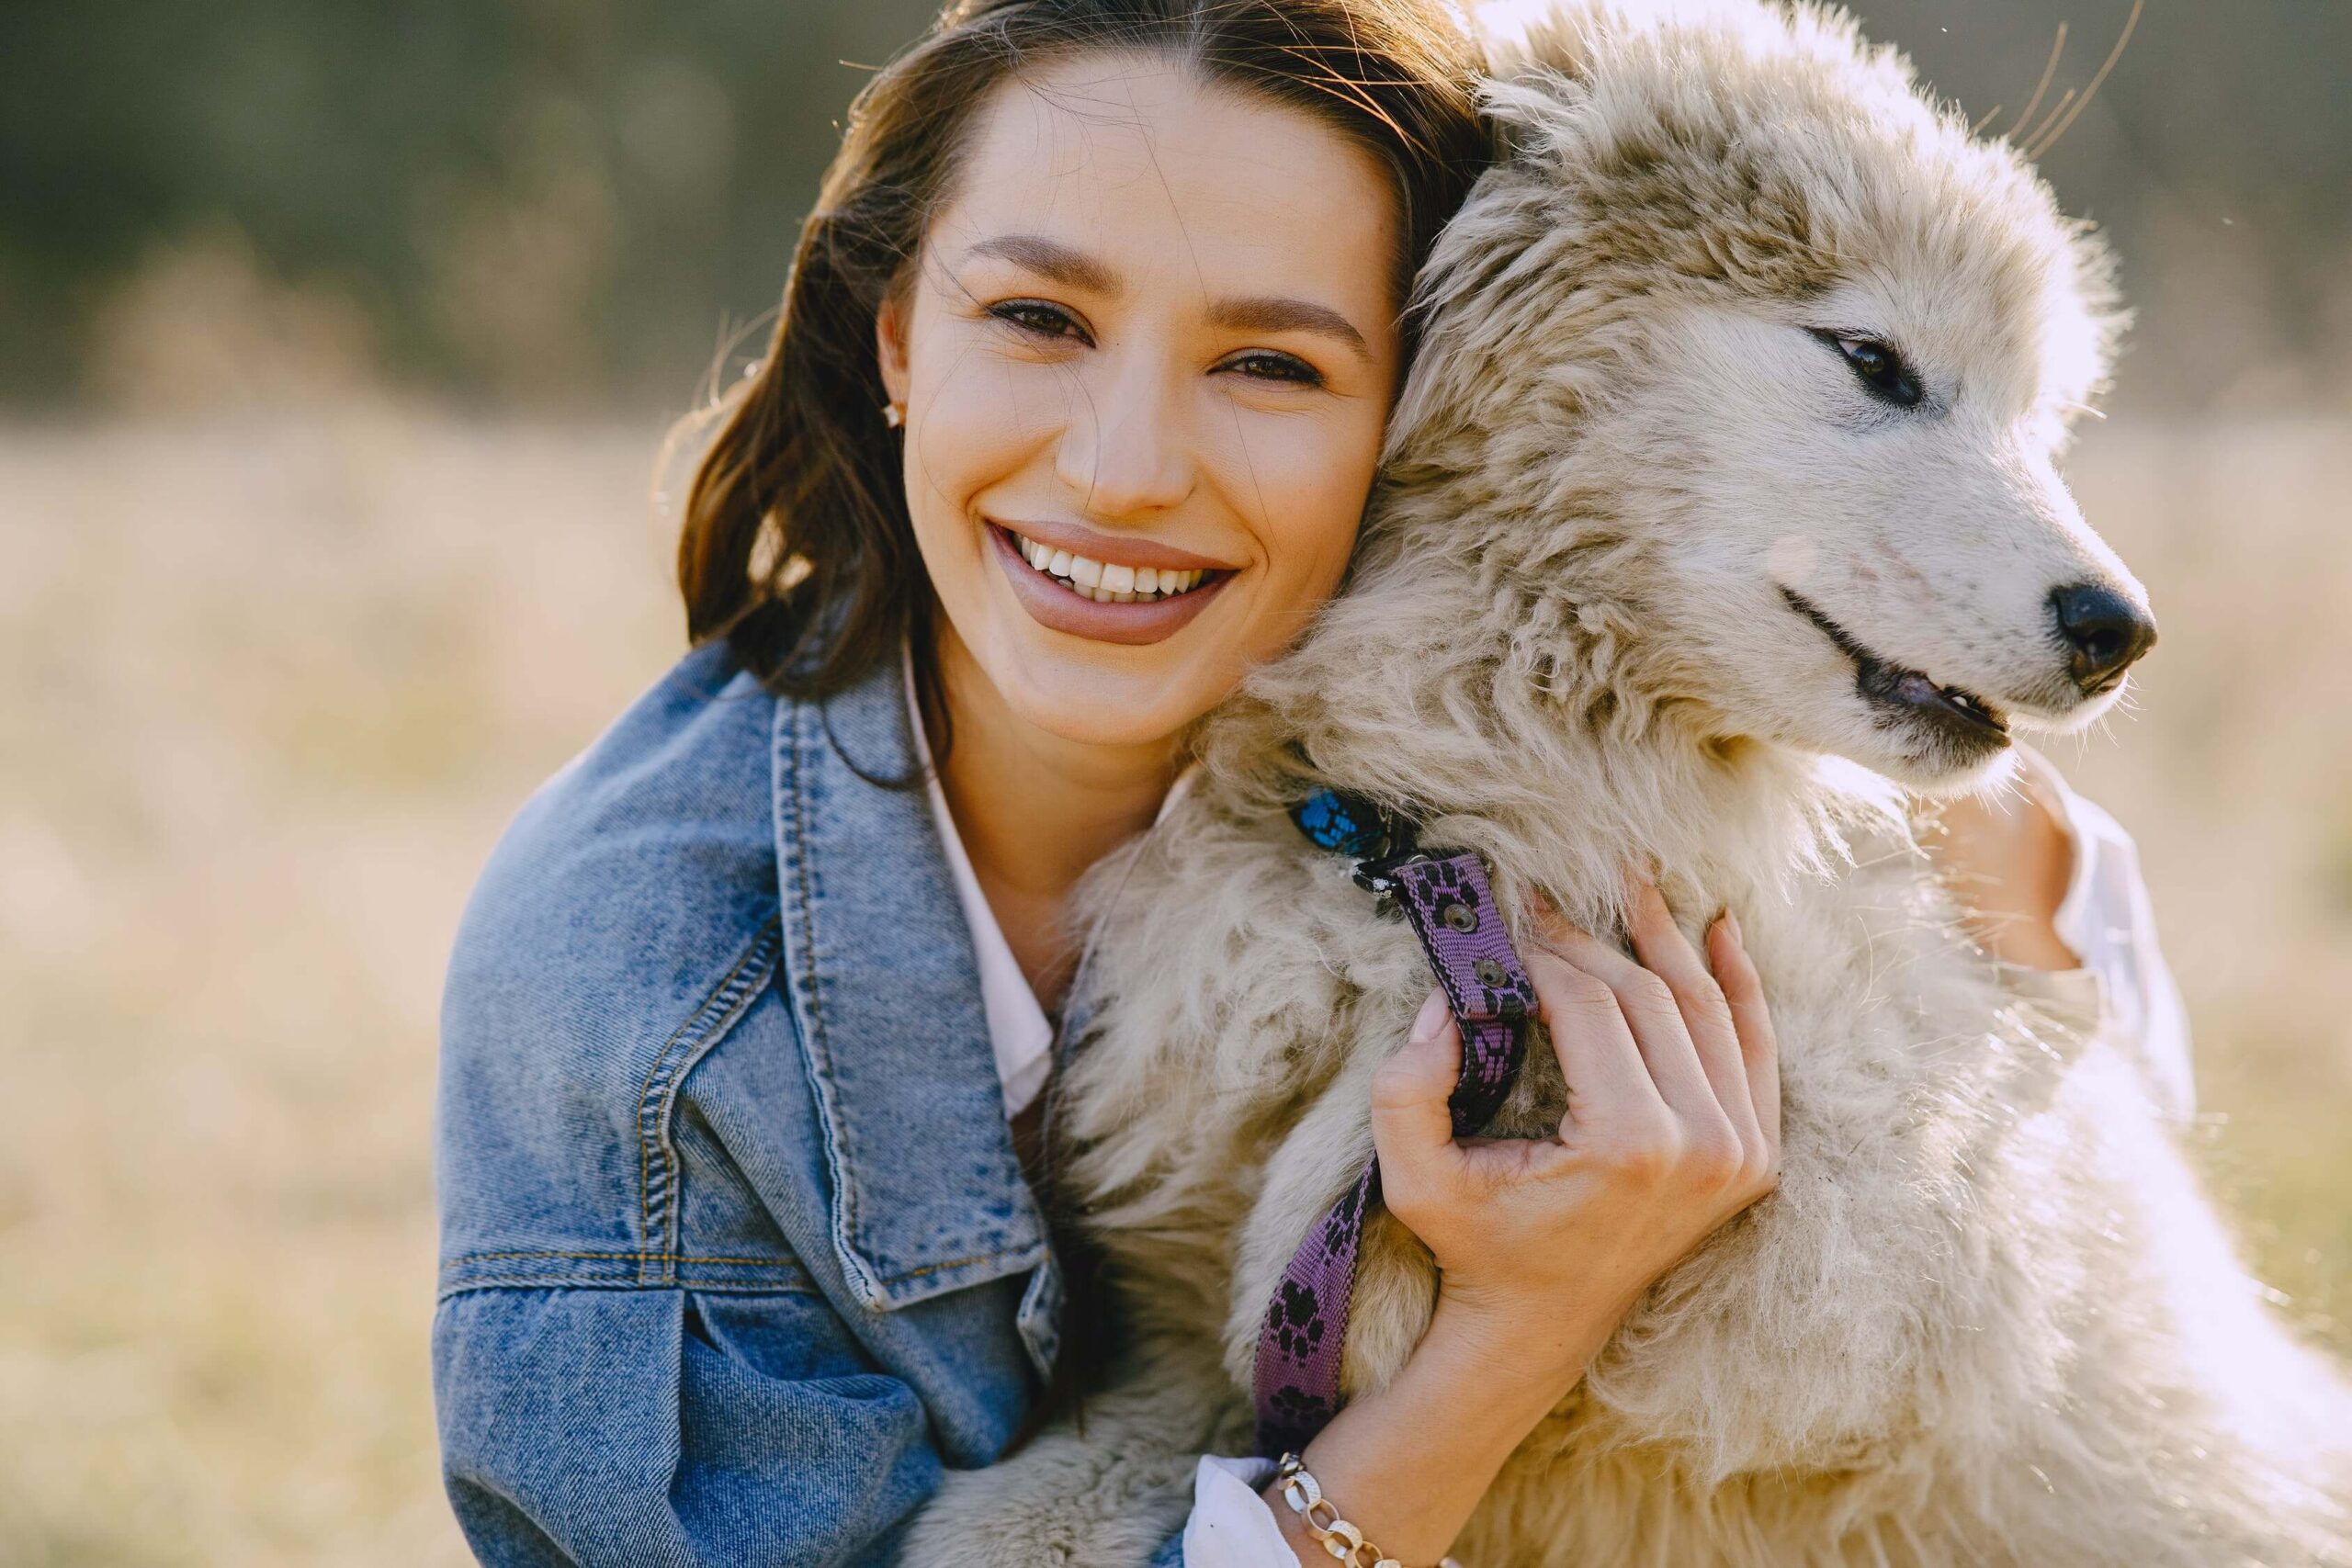 Connor Pet Health - we know that keeping our pets happy, healthy and engaged is extremely important part of all of our lives.